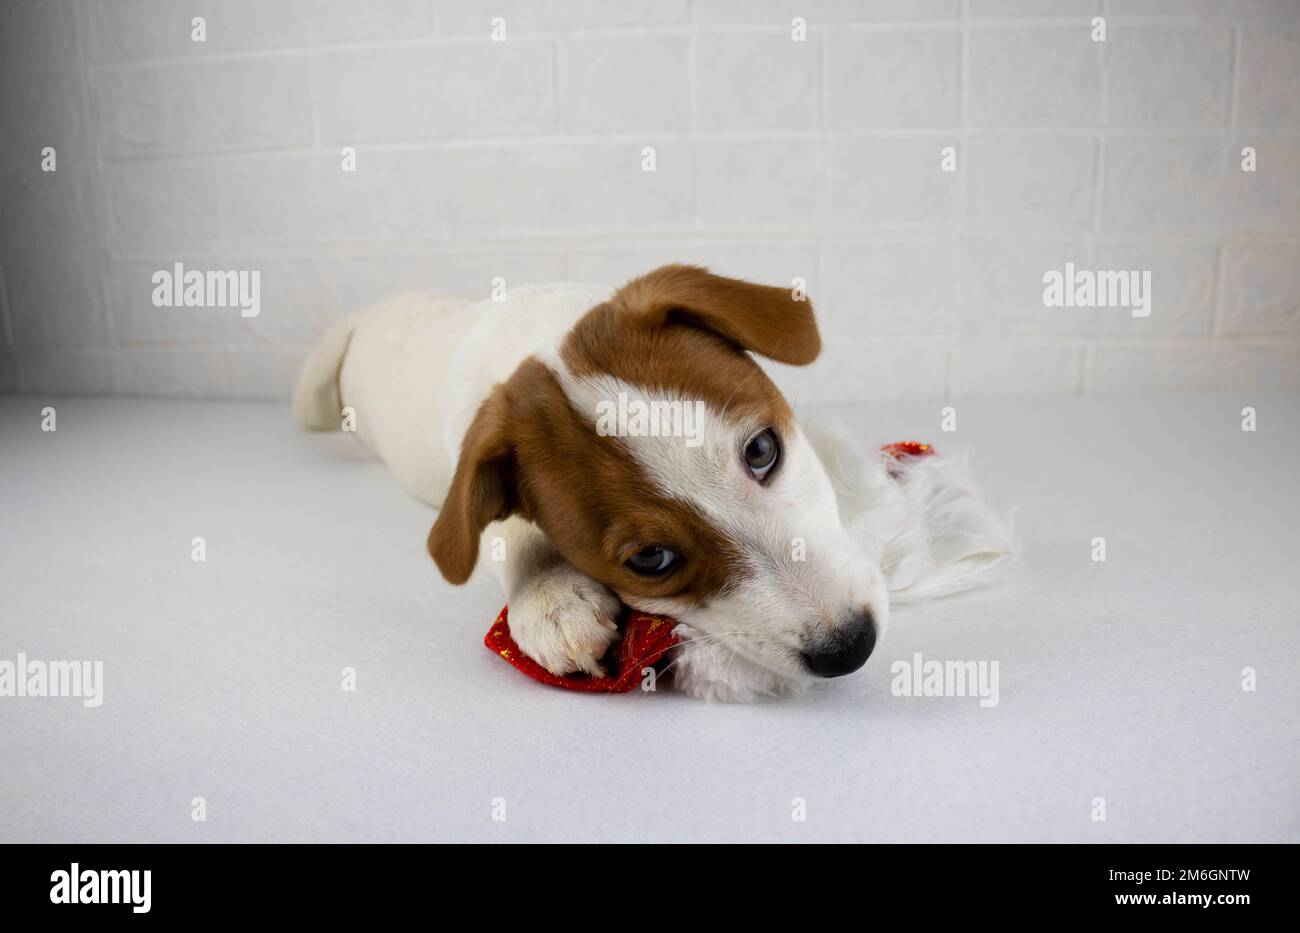 A Jack Russell terrier puppy looks into the camera isolated on a white background. Stock Photo